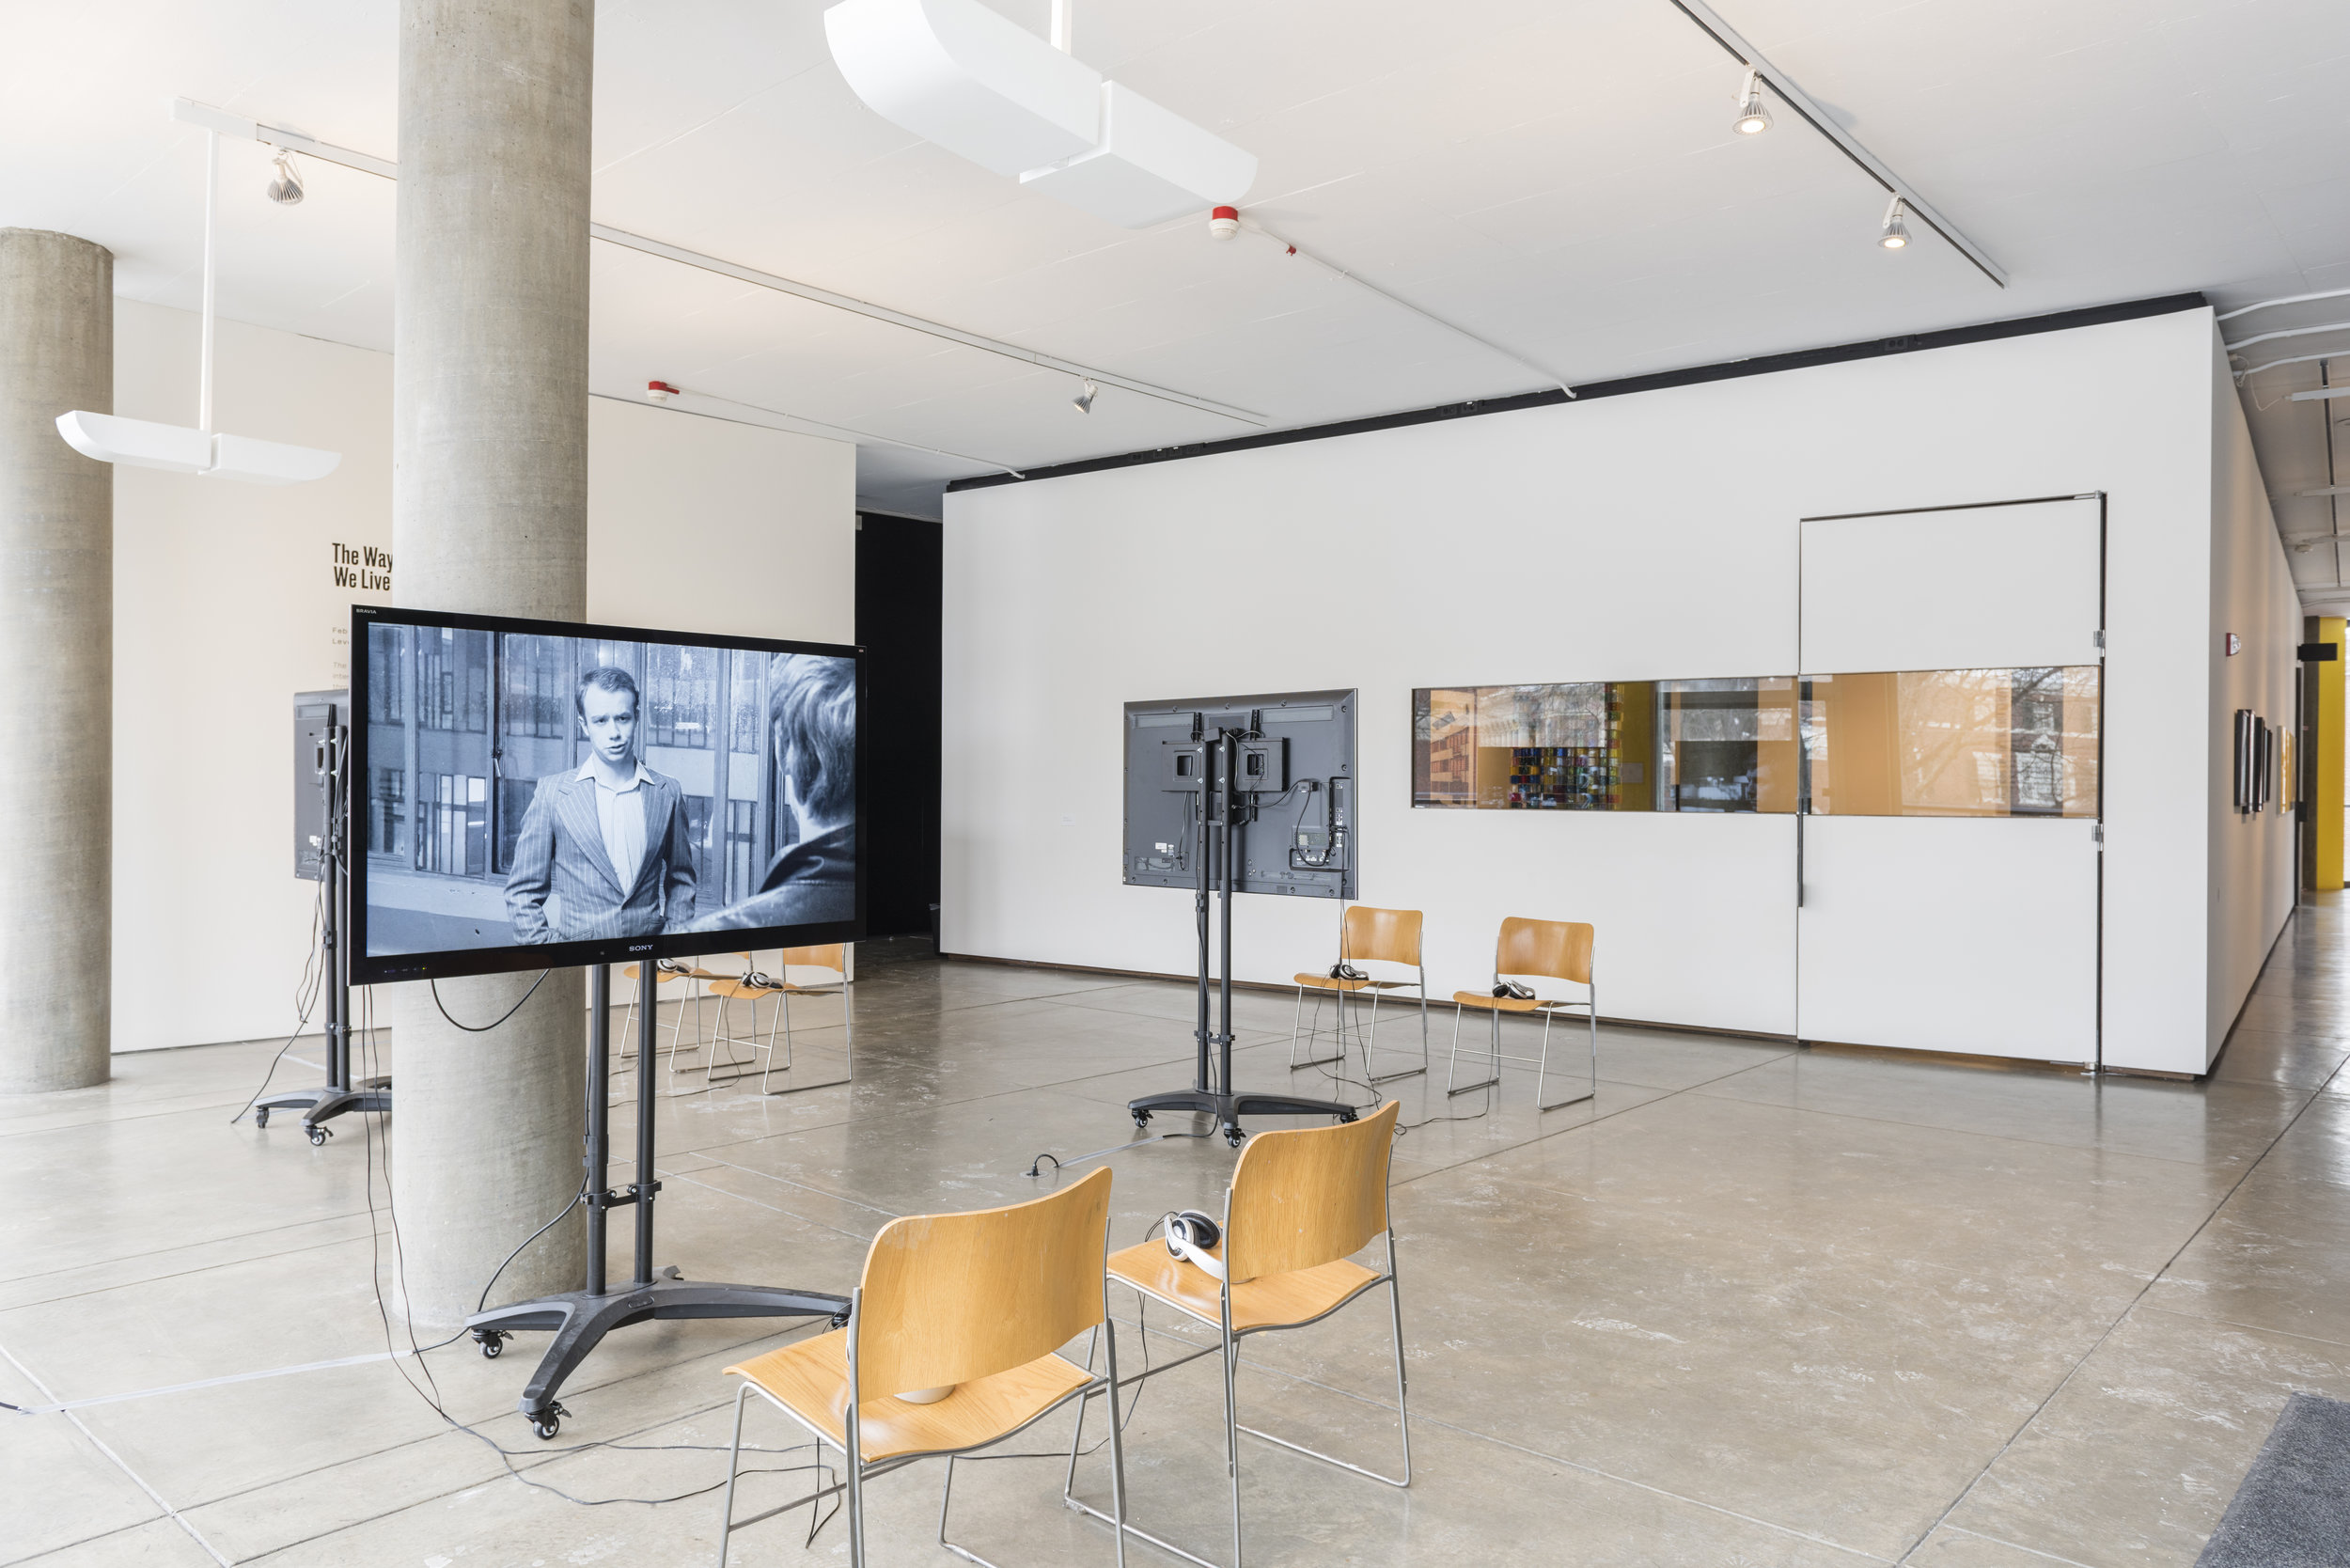  Gerard Byrne,&nbsp; Subject , 2009, installation view, three-channel video shown on monitors and vinyl wall text. 27 × 32 feet. Commissioned by the Henry Moore Institute, Leeds, England. Courtesy the artist and Green on Red Gallery, Dublin. 